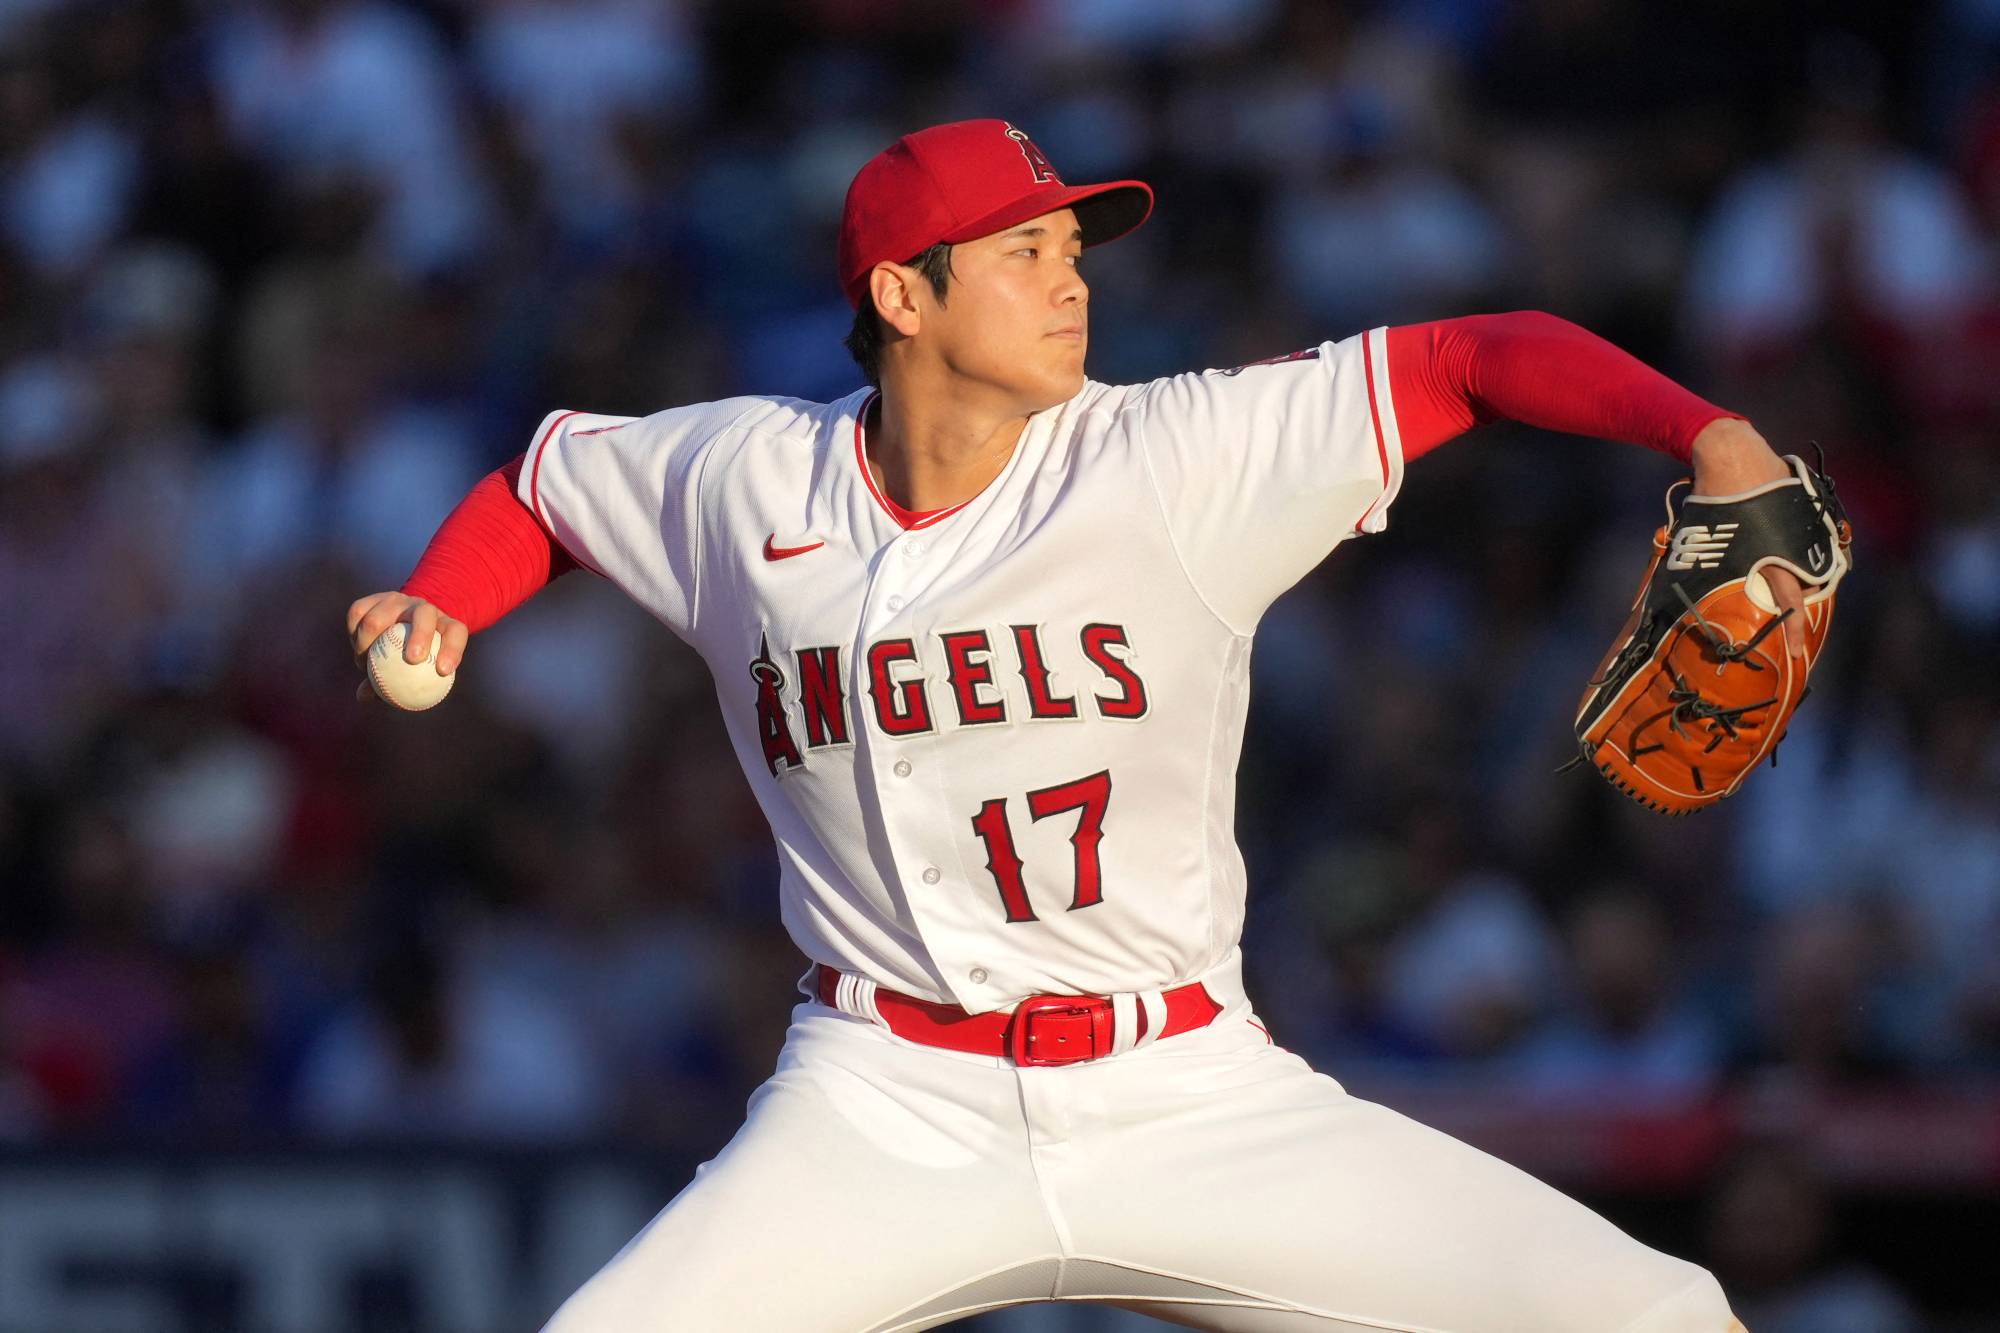 Shohei Ohtani strikes out 12 in loss as Angels lose close game